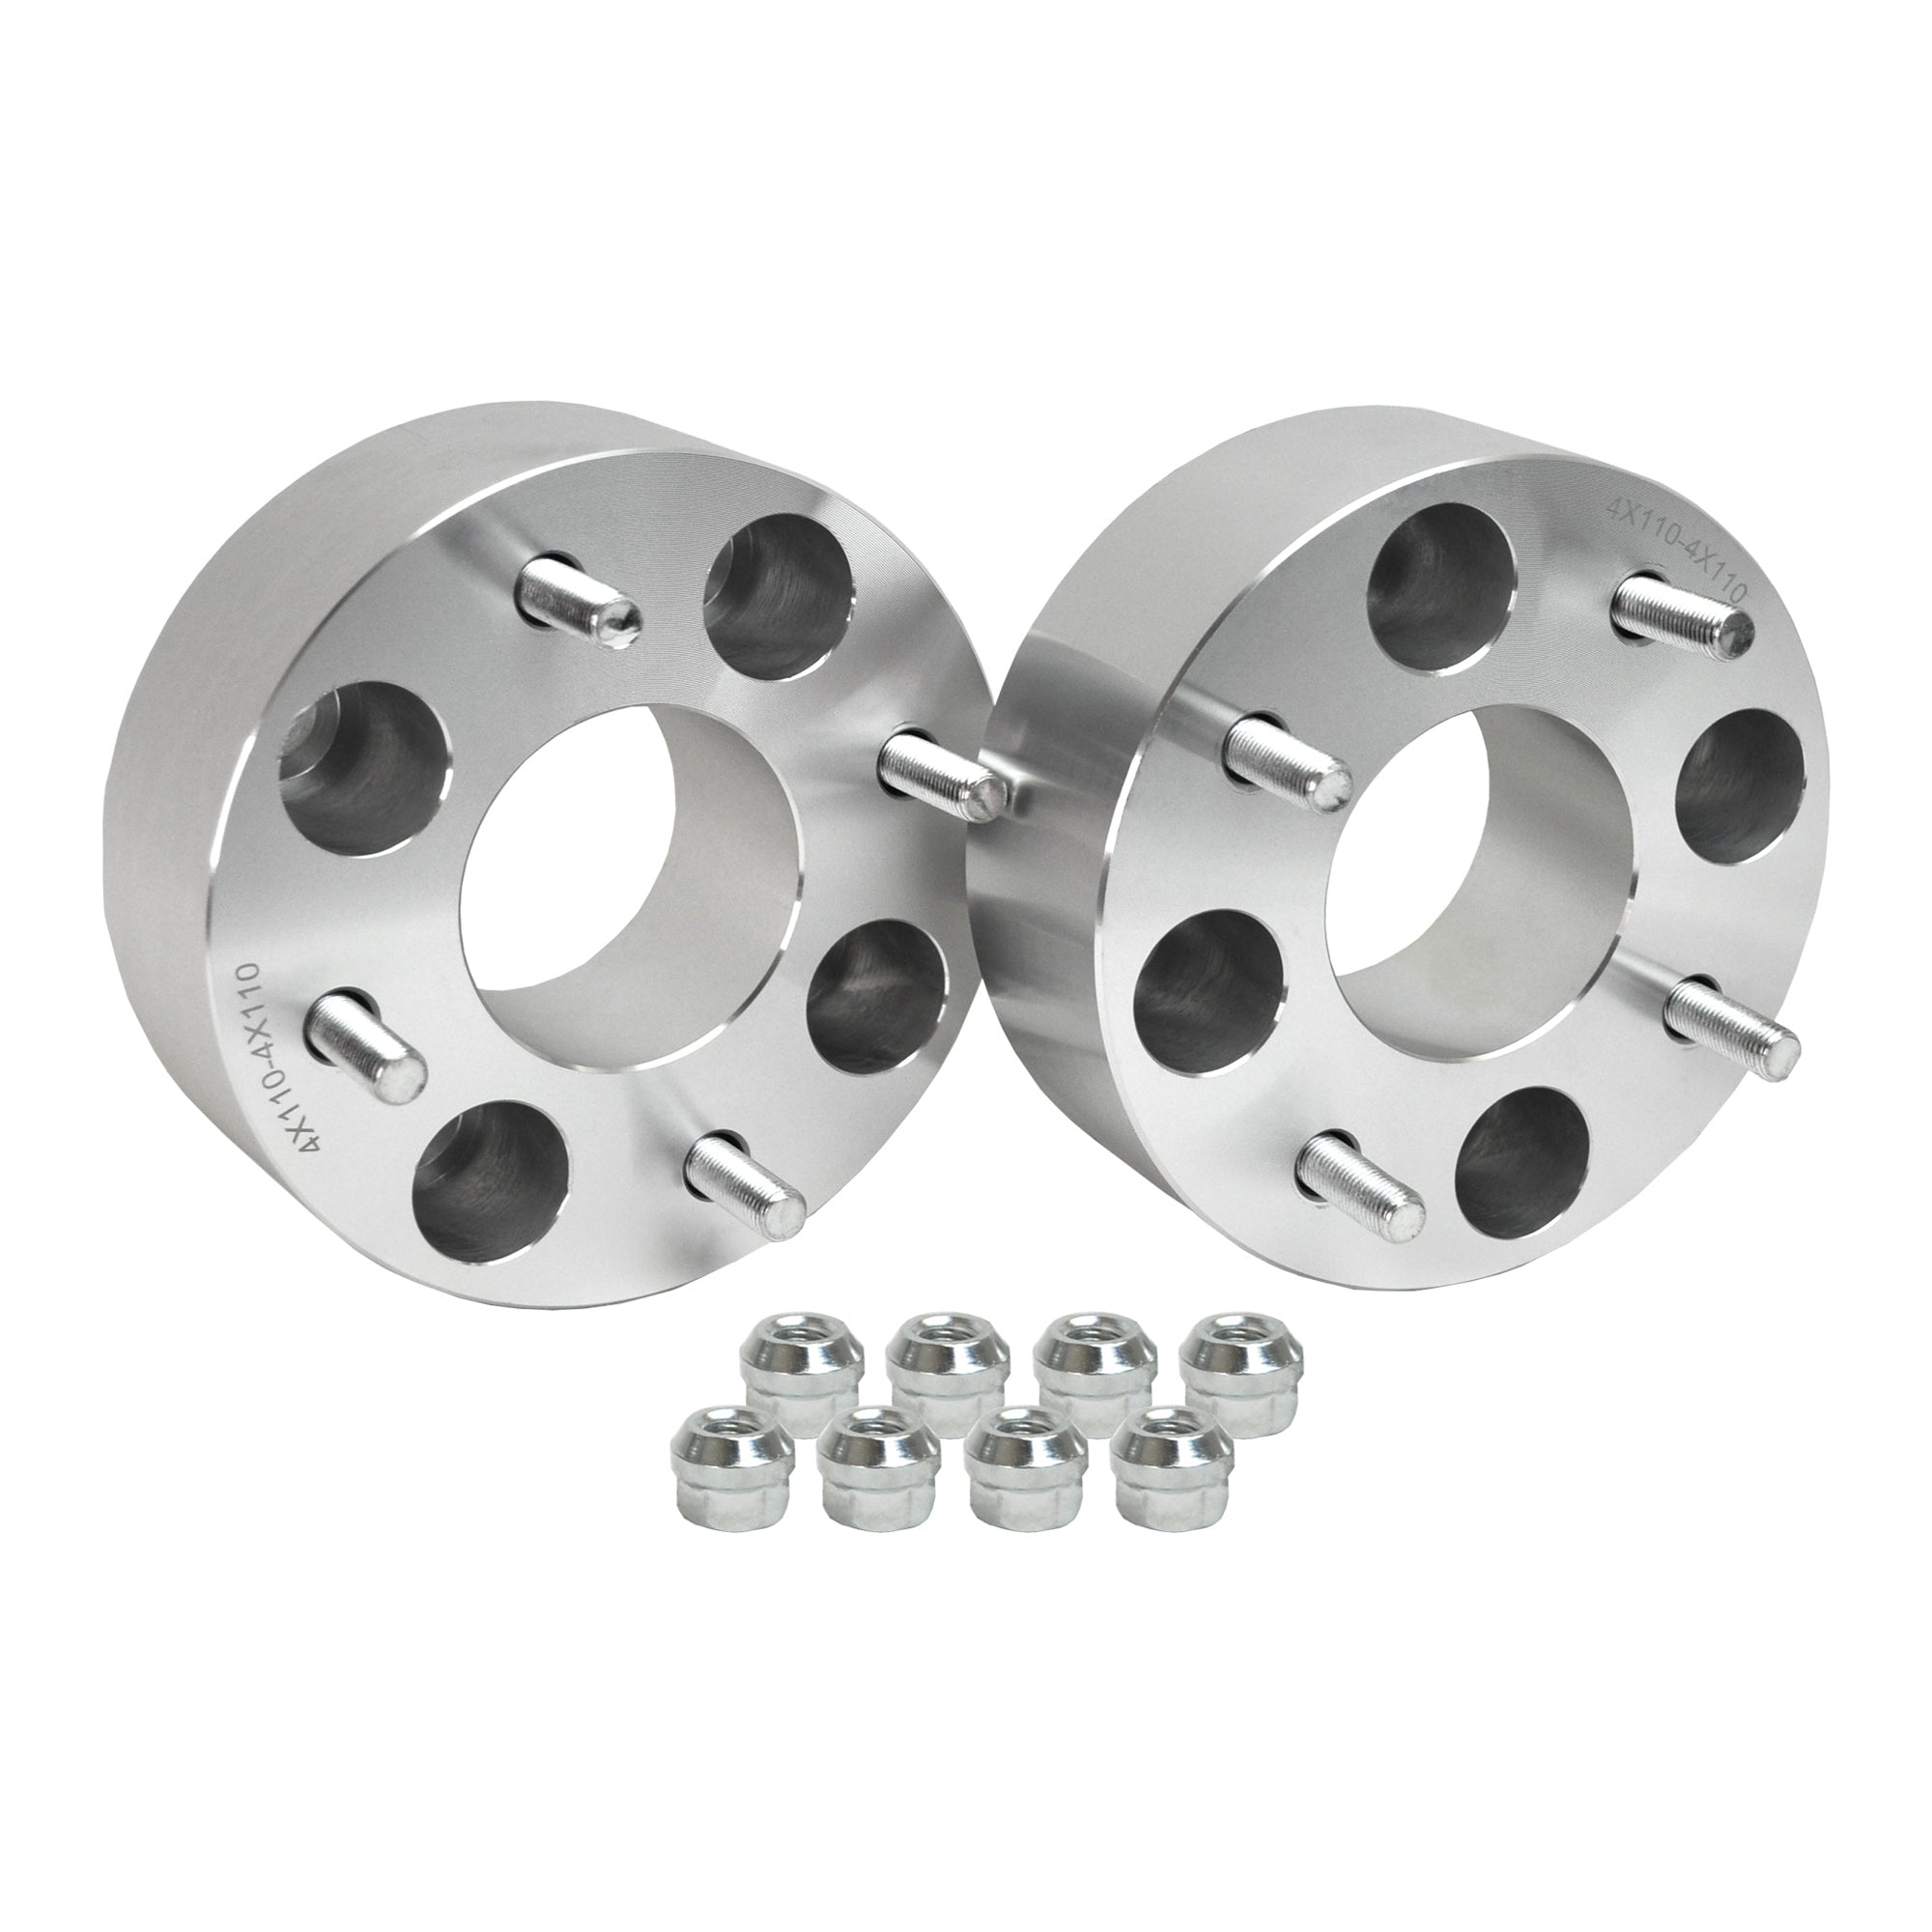 Wheel Spacer for Arctic Cat Prowler 650 